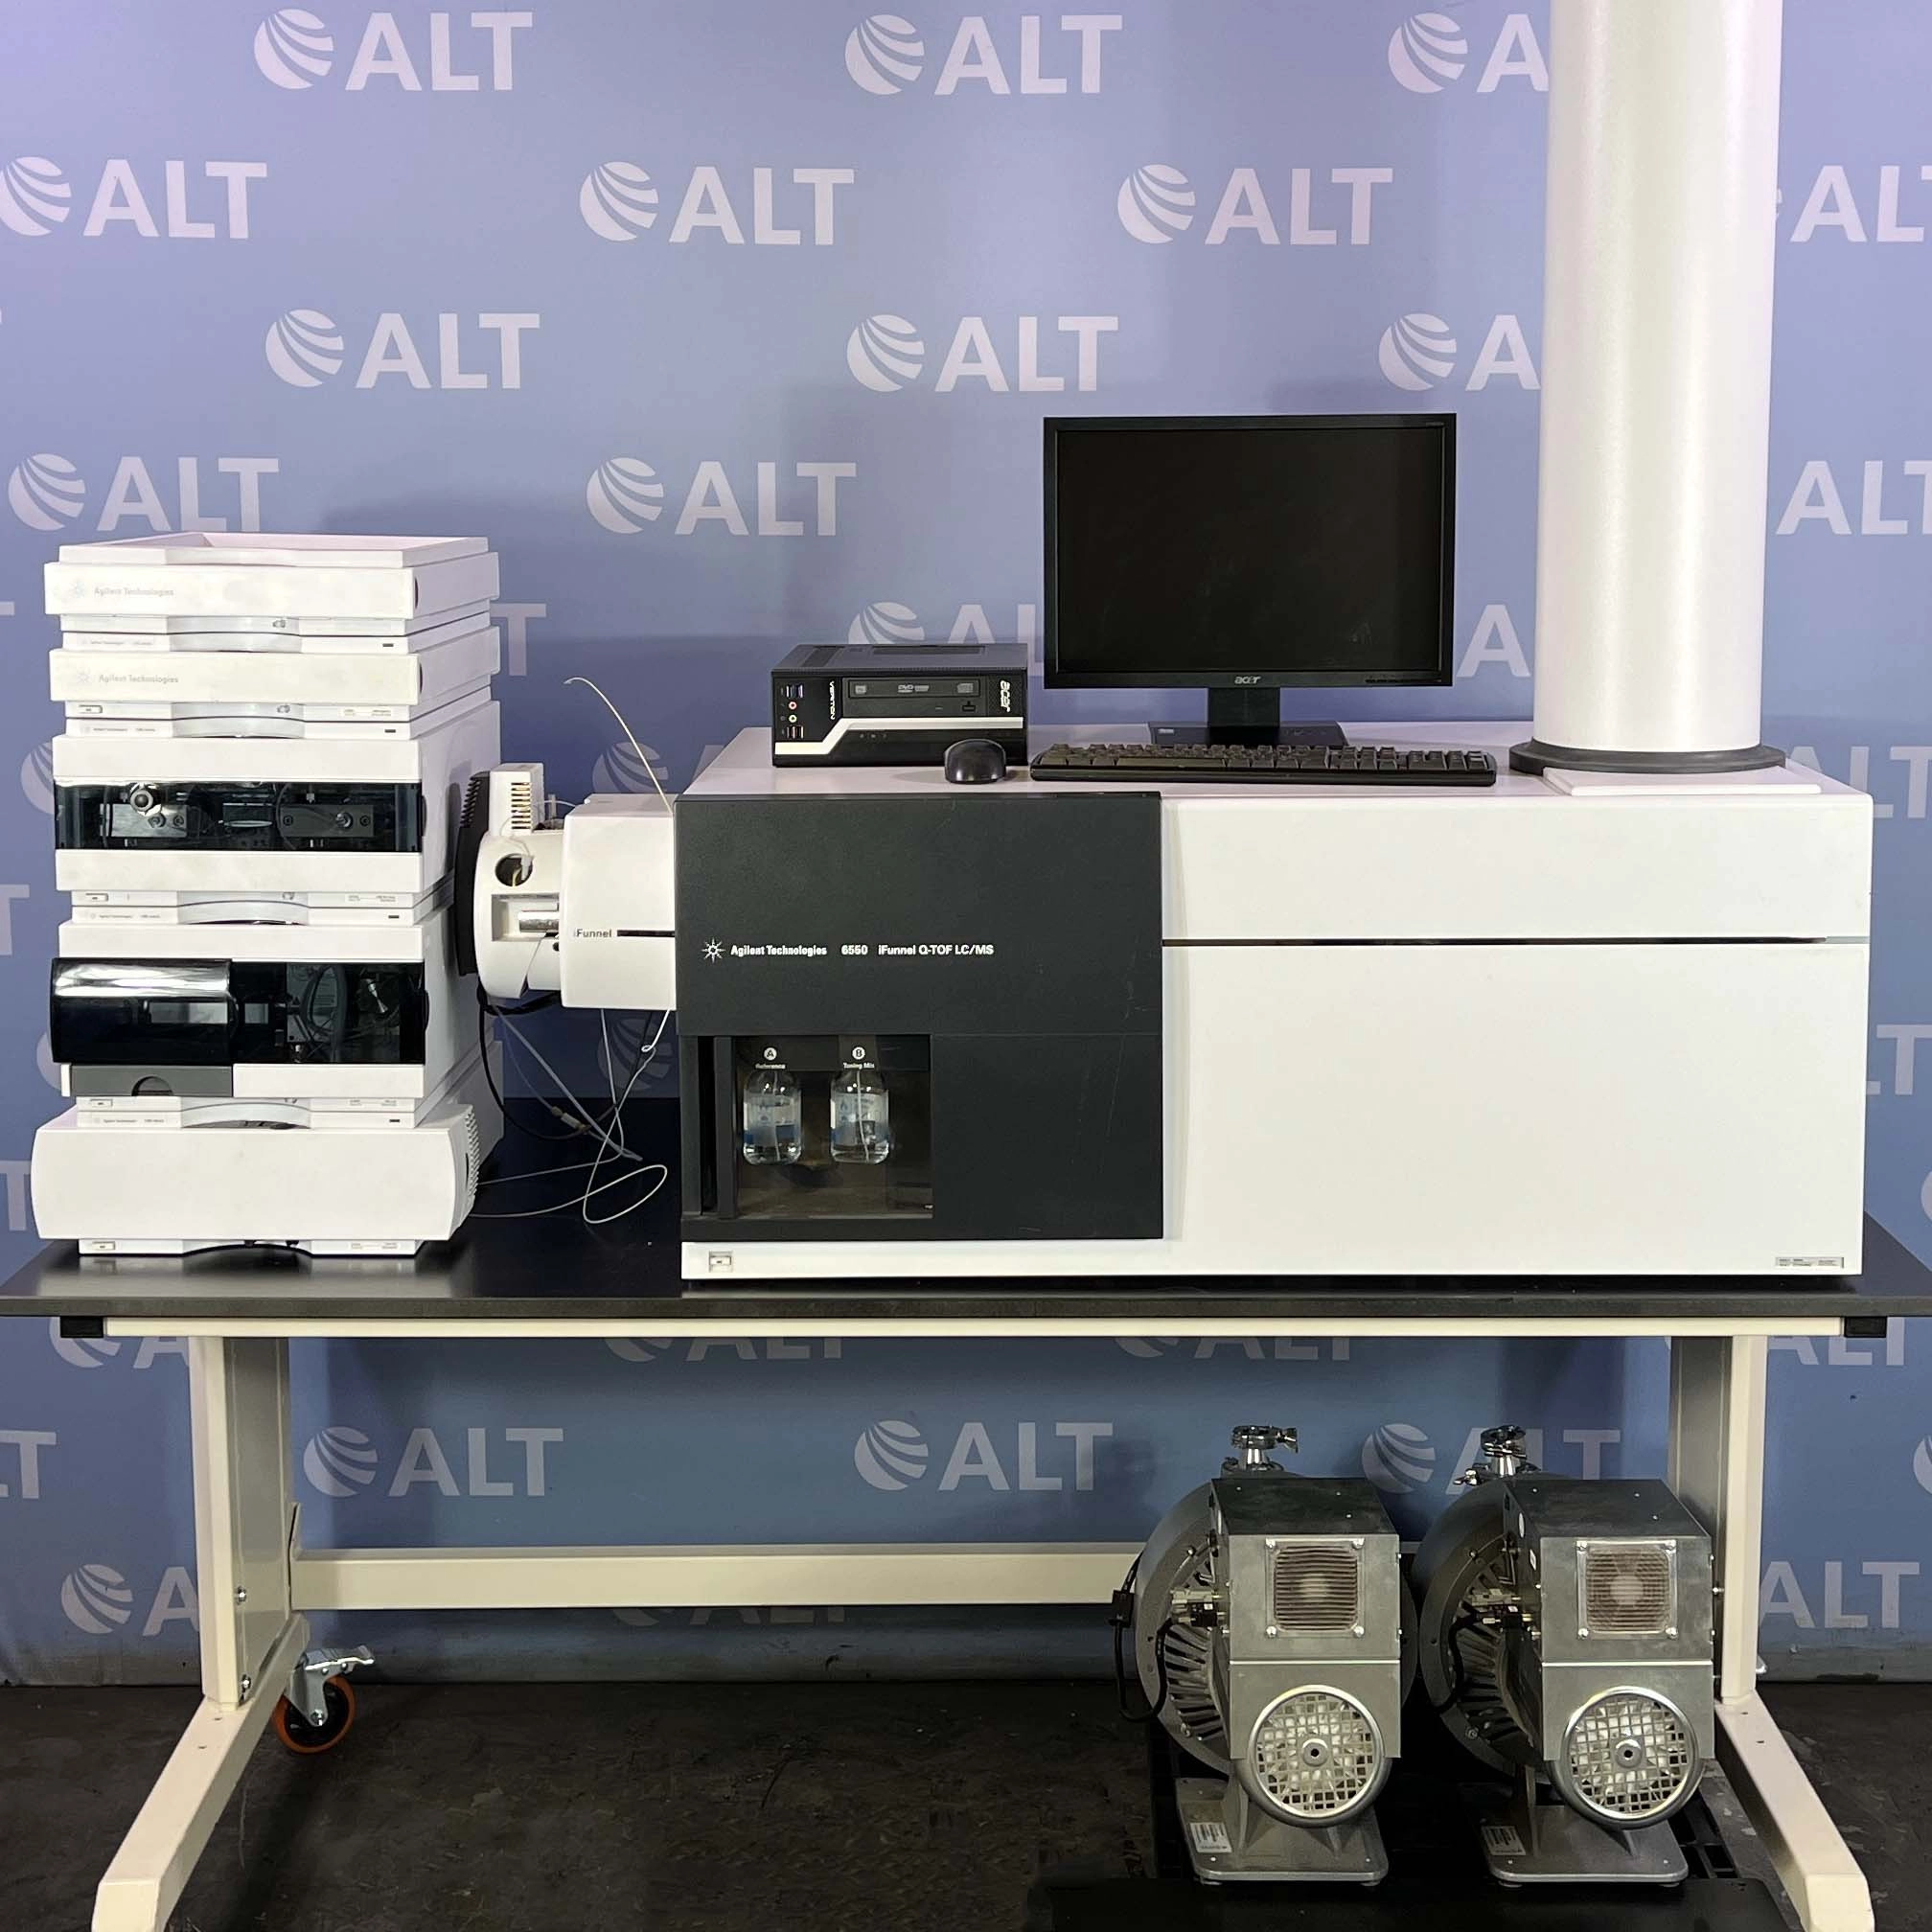 Agilent 6500 Series Q-TOF LC/MS System Including G6550A iFunnel Q-TOF Mass Spectrometer And 1260 HPLC System (G1322A Degasser, G1312B Binary Pump, G1329B ALS Autosampler, G1316A TCC)